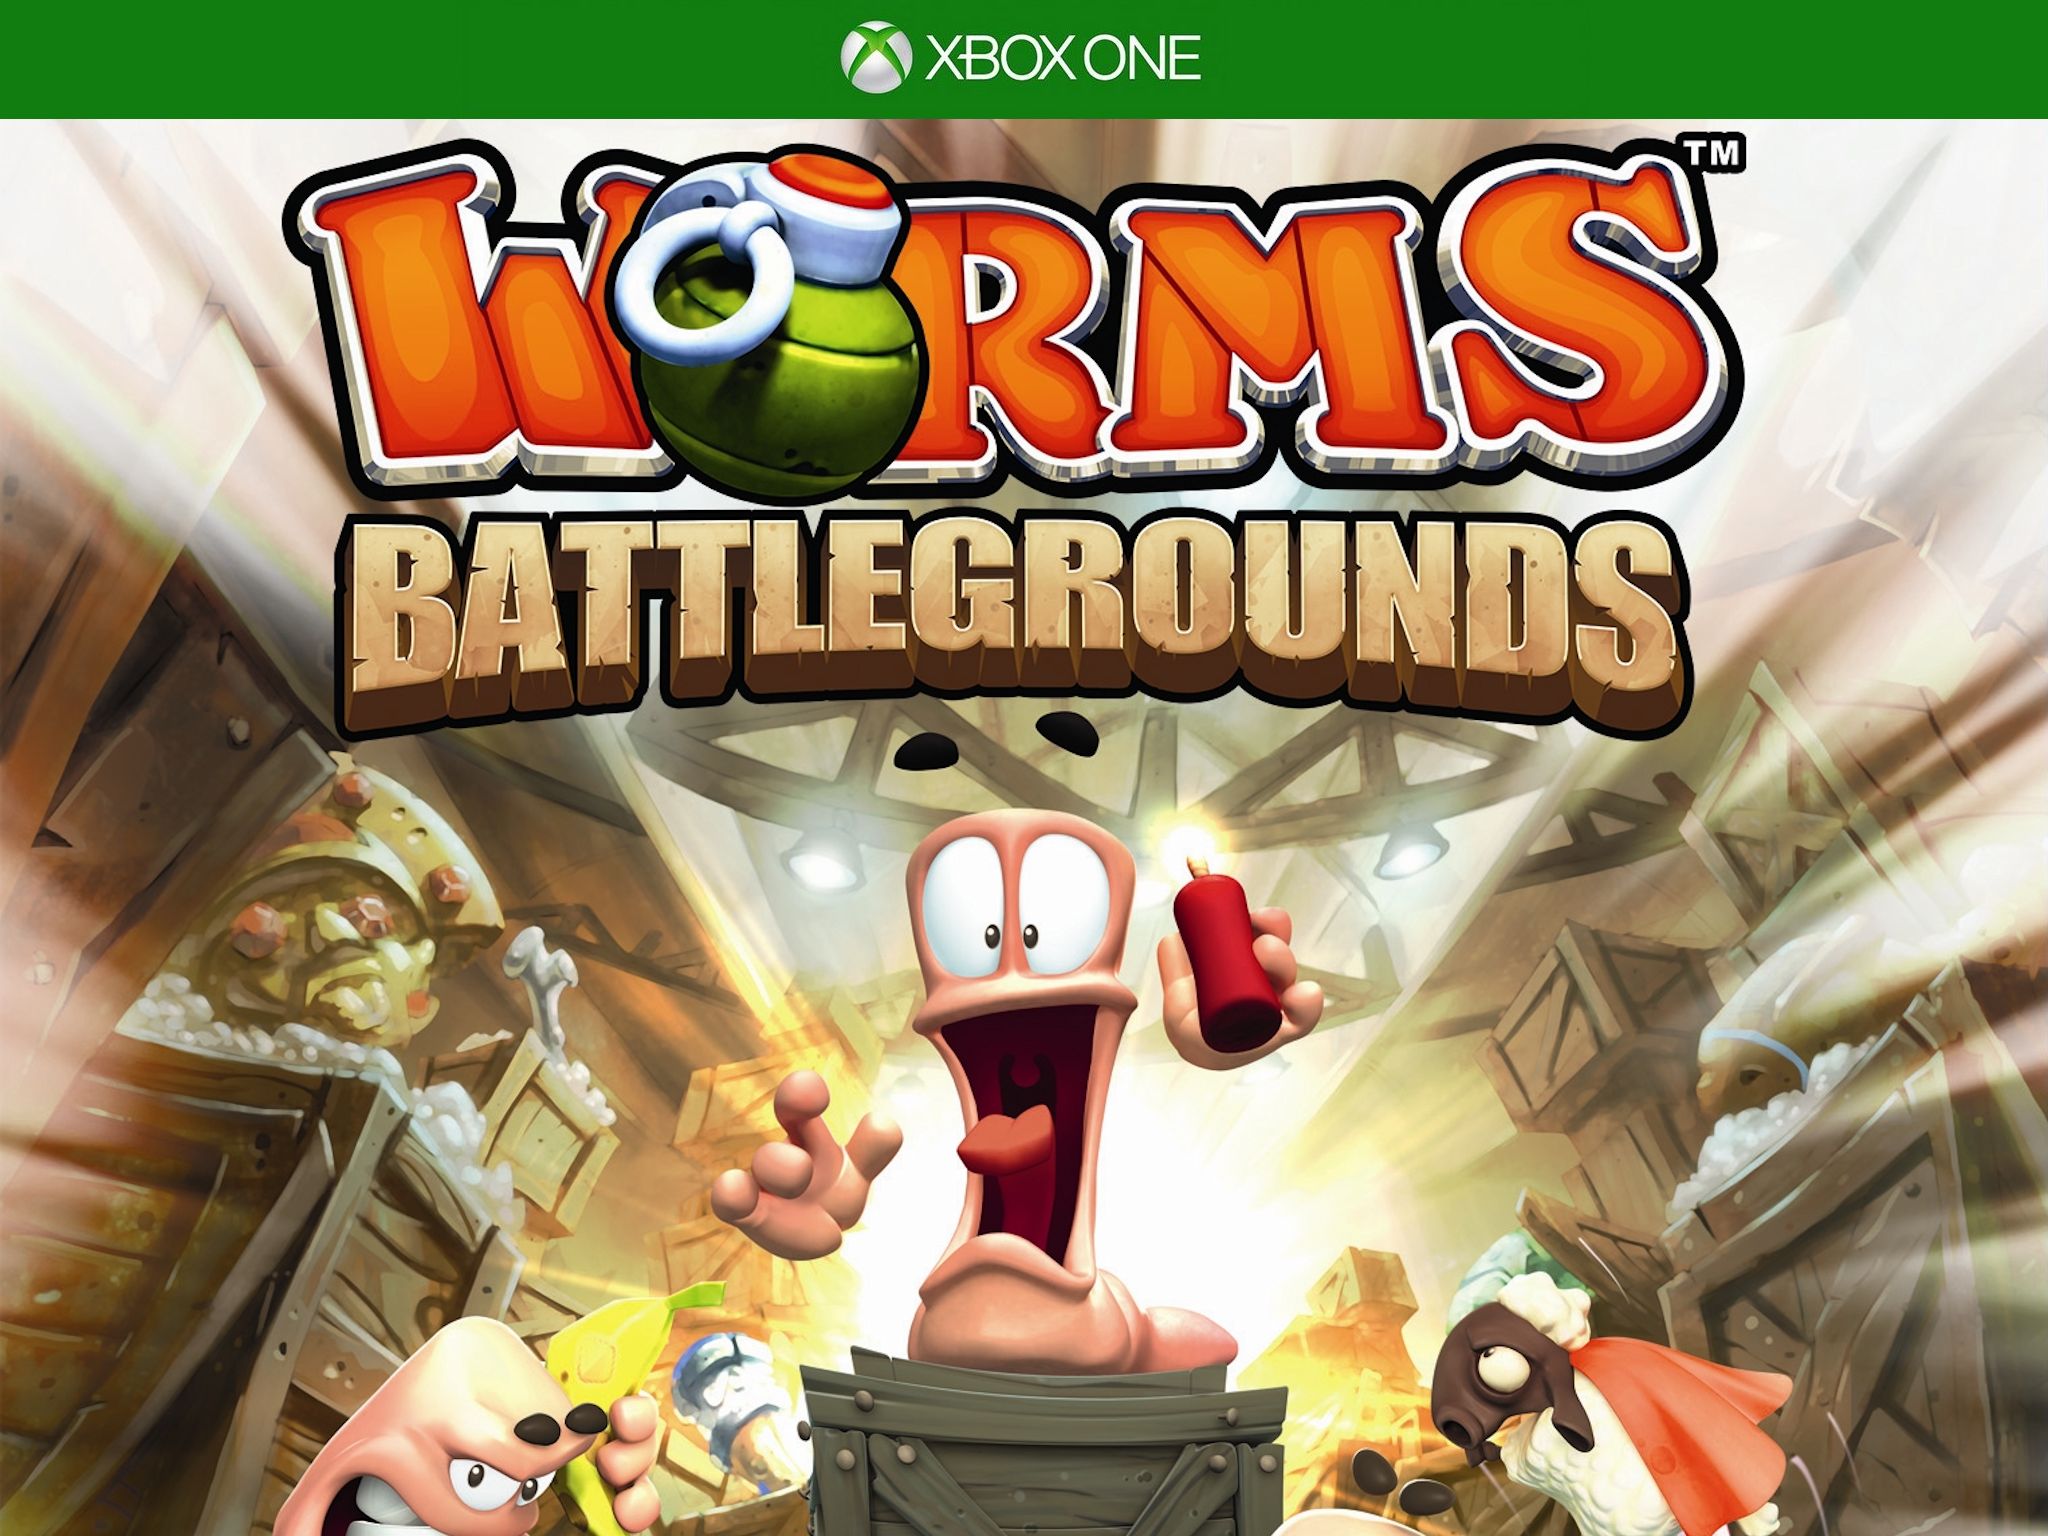 boerderij Steil Ontkennen Worms Battlegrounds review: The classic game of Worms comes to Xbox One |  Windows Central